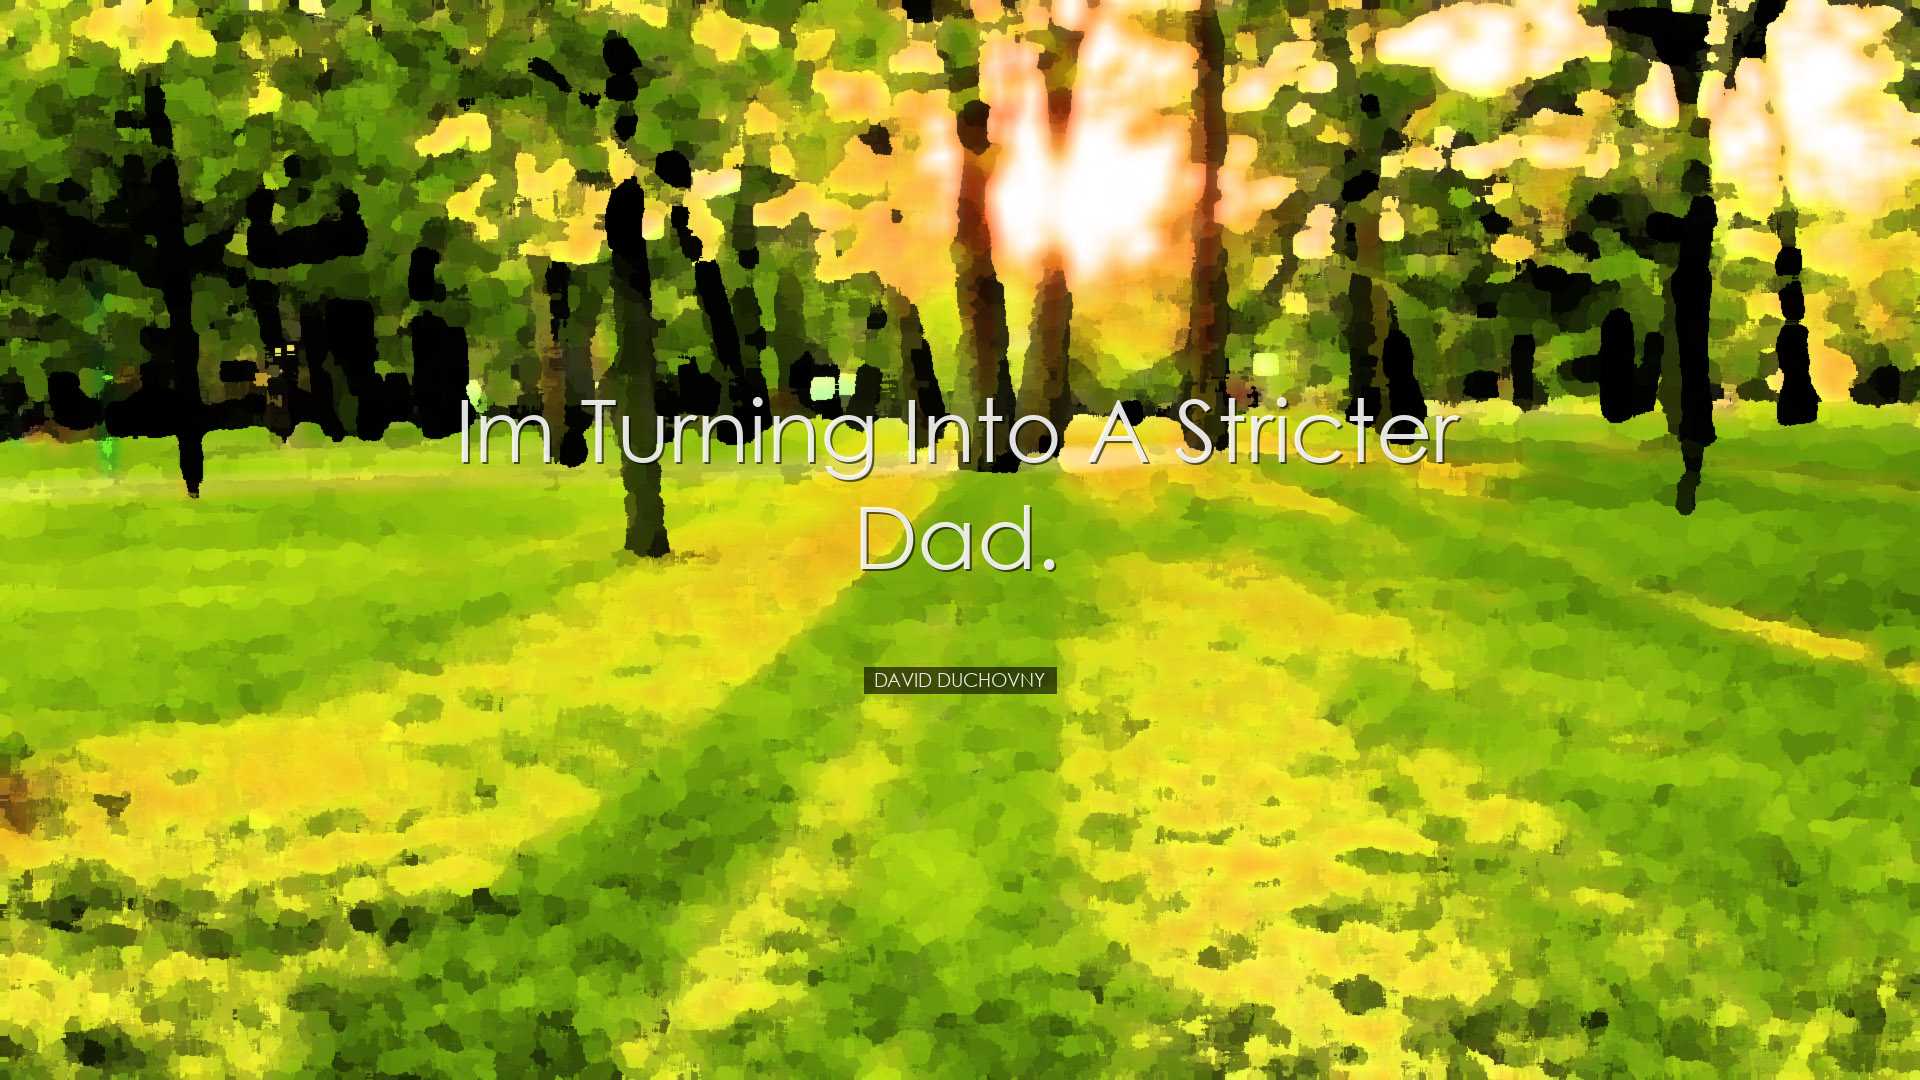 Im turning into a stricter dad. - David Duchovny